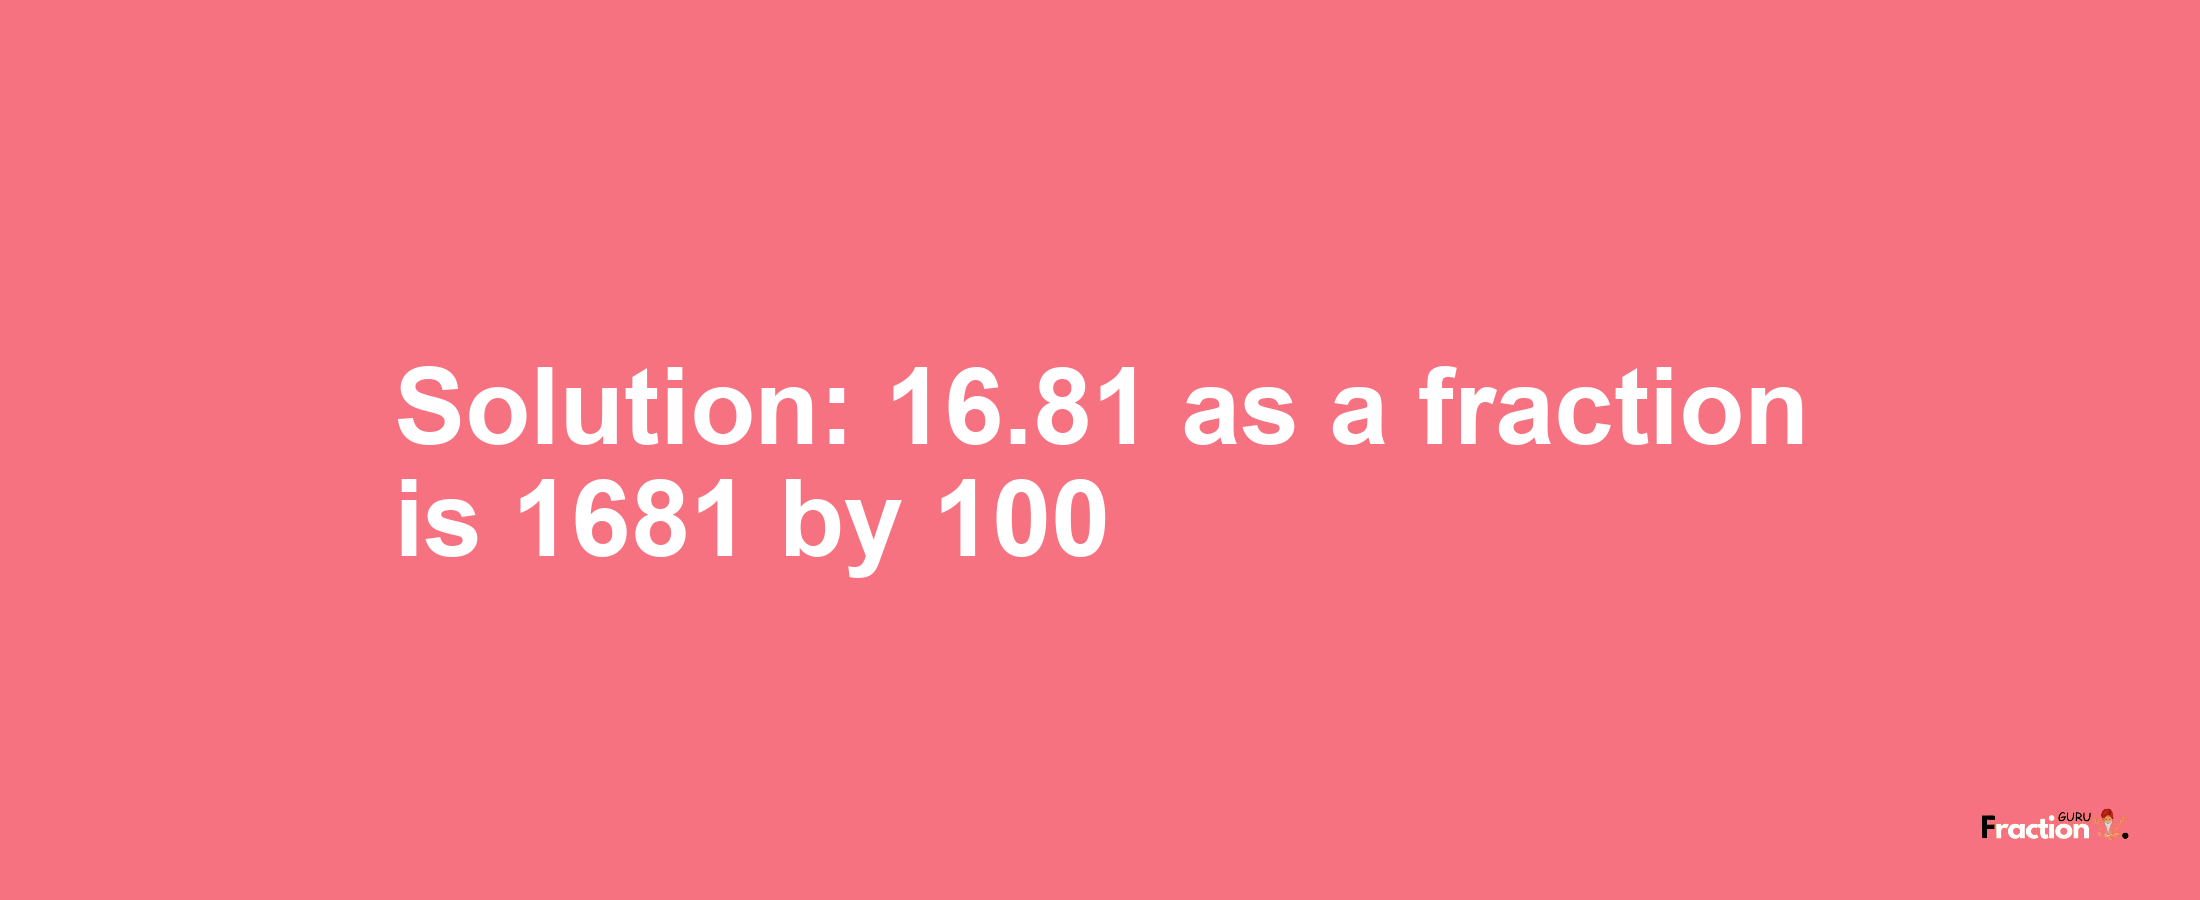 Solution:16.81 as a fraction is 1681/100